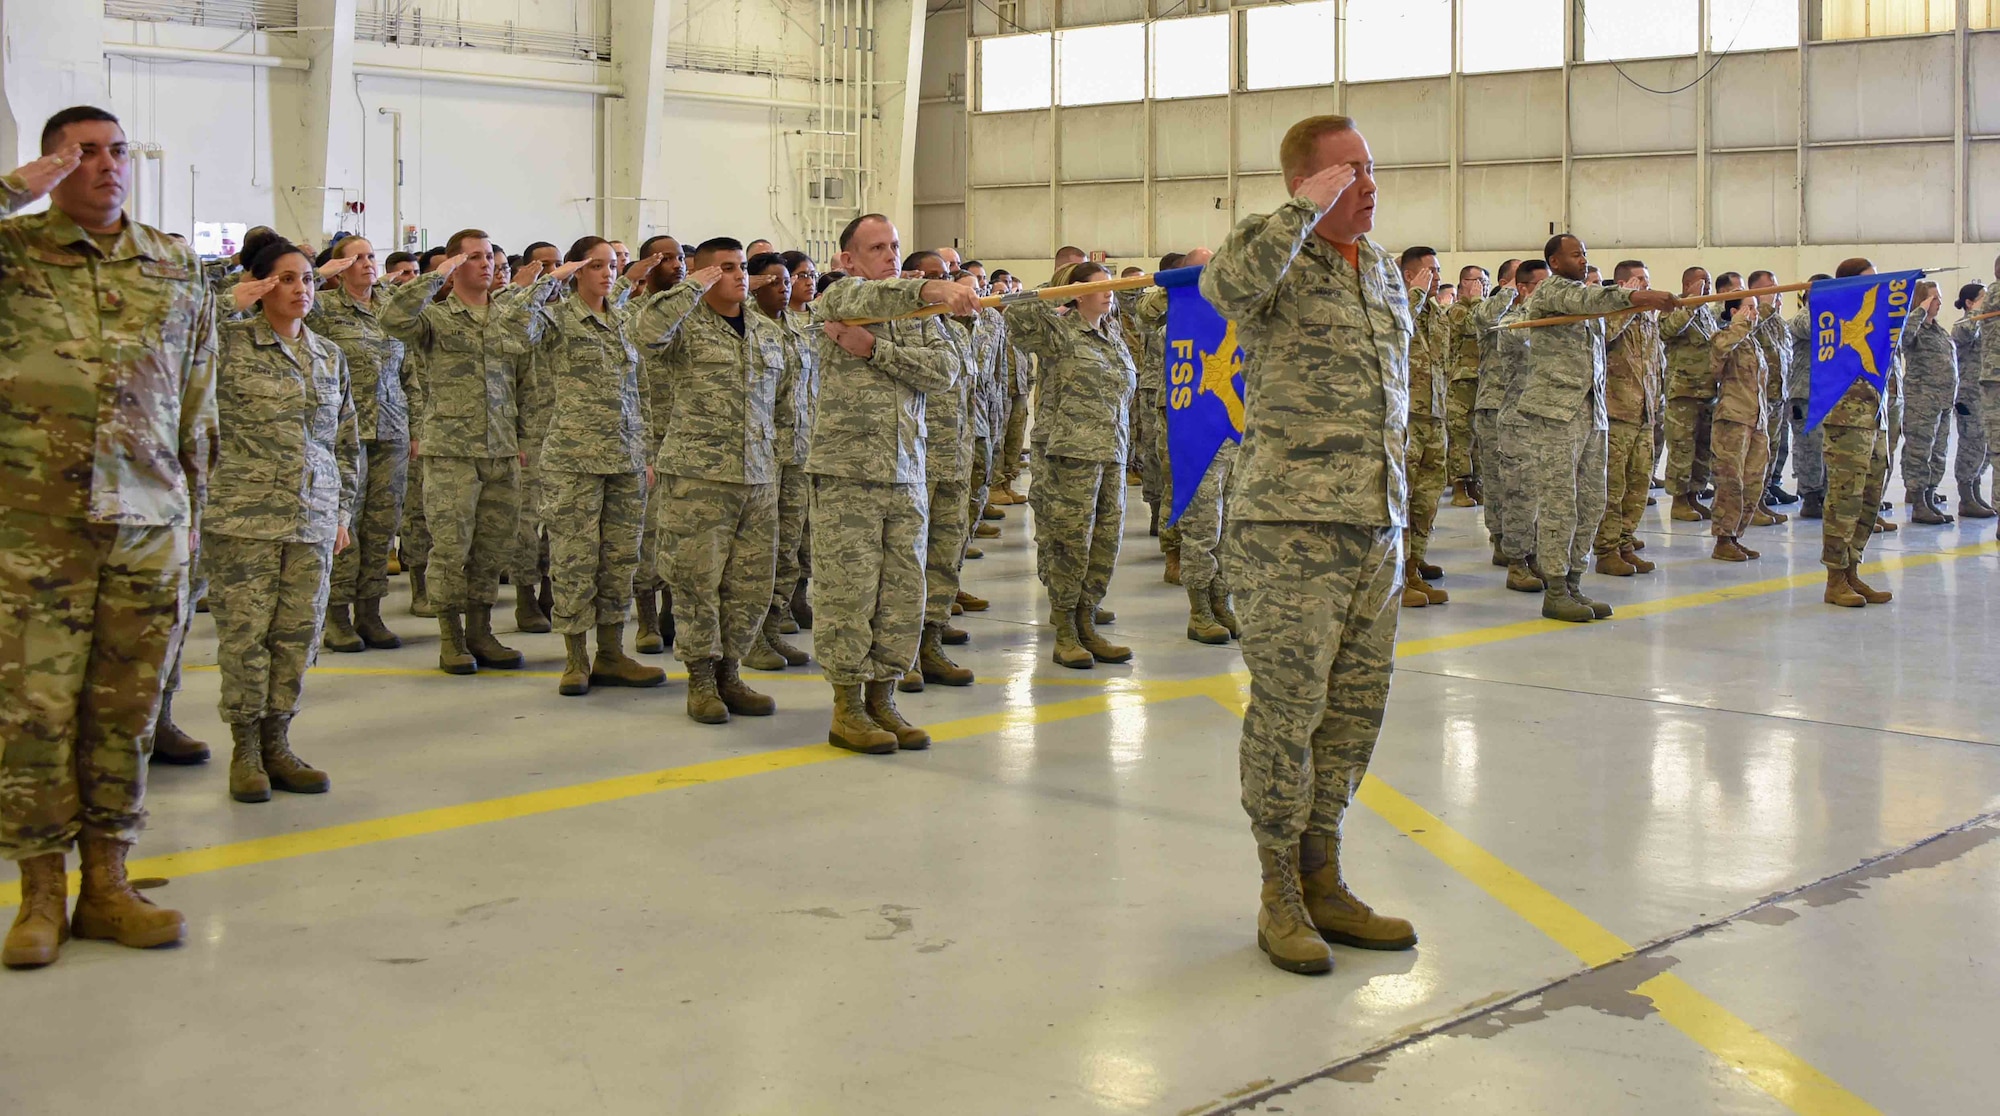 Airmen from the 301st Mission Support Group render Col. L. Gregg Russell, 301 MSG commander, his first salute, Jan. 12, 2020, at U.S. Naval Air Station Joint Reserve Base Fort Worth, Texas. The 301 MSG is comprised of six squadrons and five civilian departments. (U.S. Air Force photo by Senior Airman Brittany Landy)